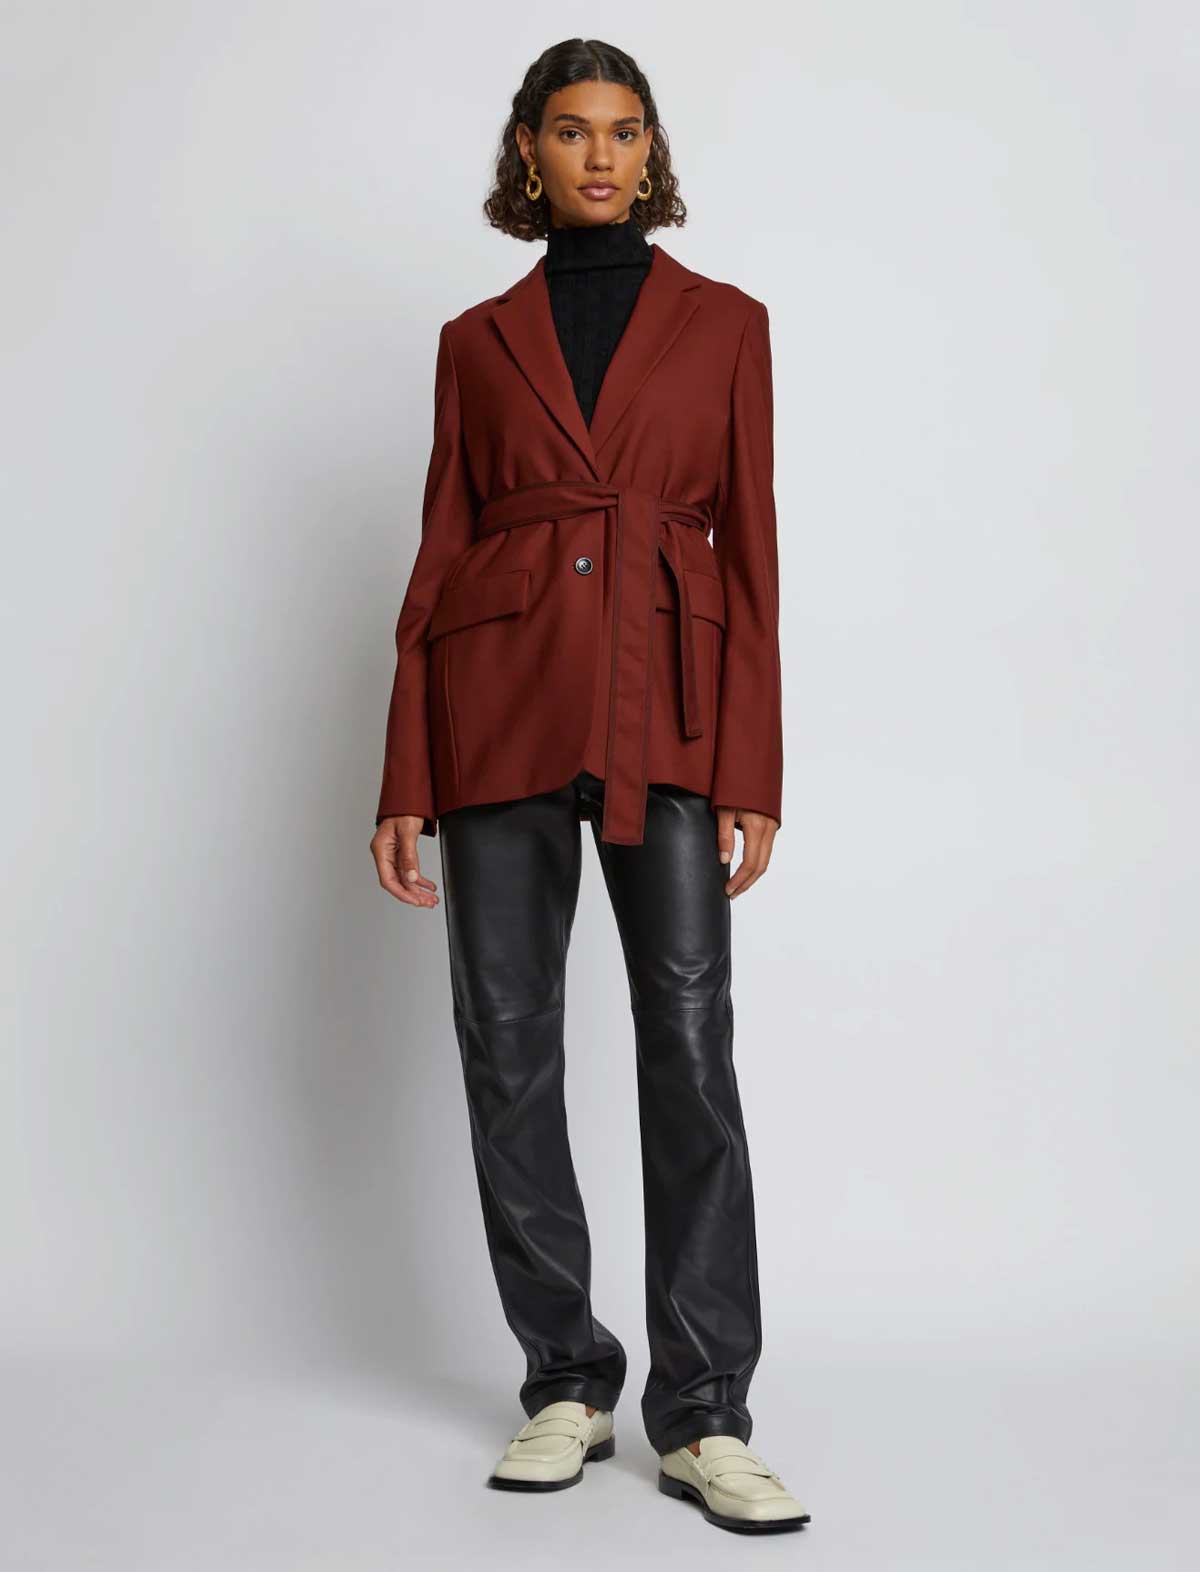 PROENZA SCHOULER WHITE LABEL Suiting Relaxed Tie Blazer in Maple